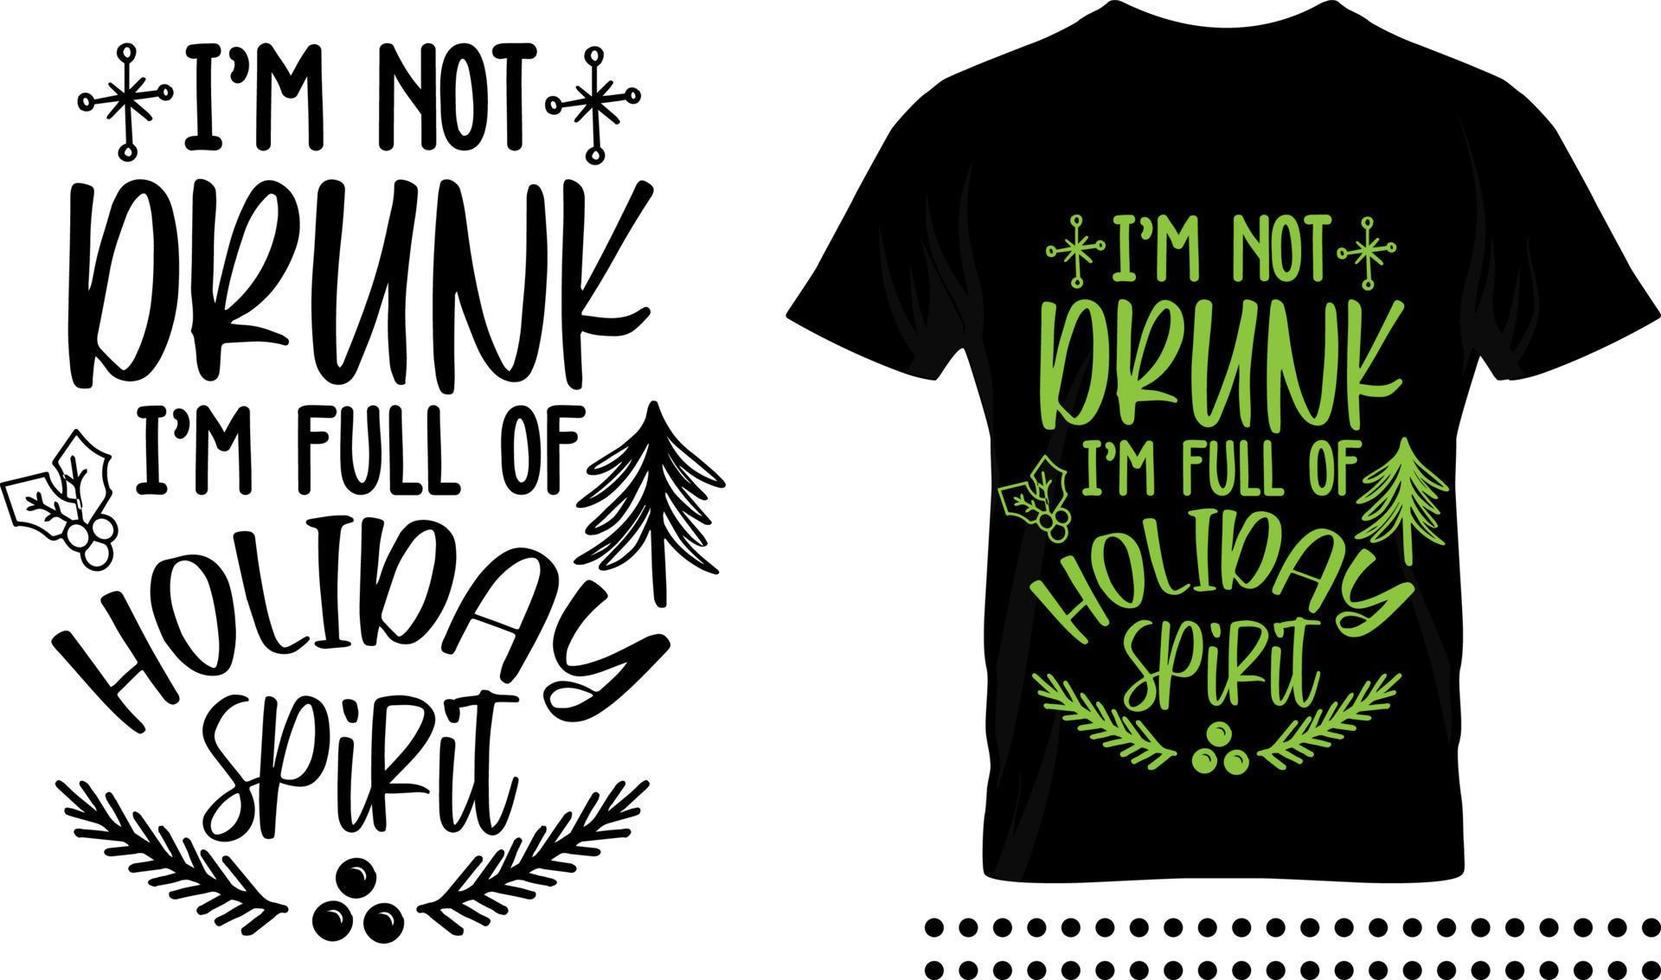 Funny Christmas saying typography print design. I'm not drunk i'm full of holiday spirit vector quote